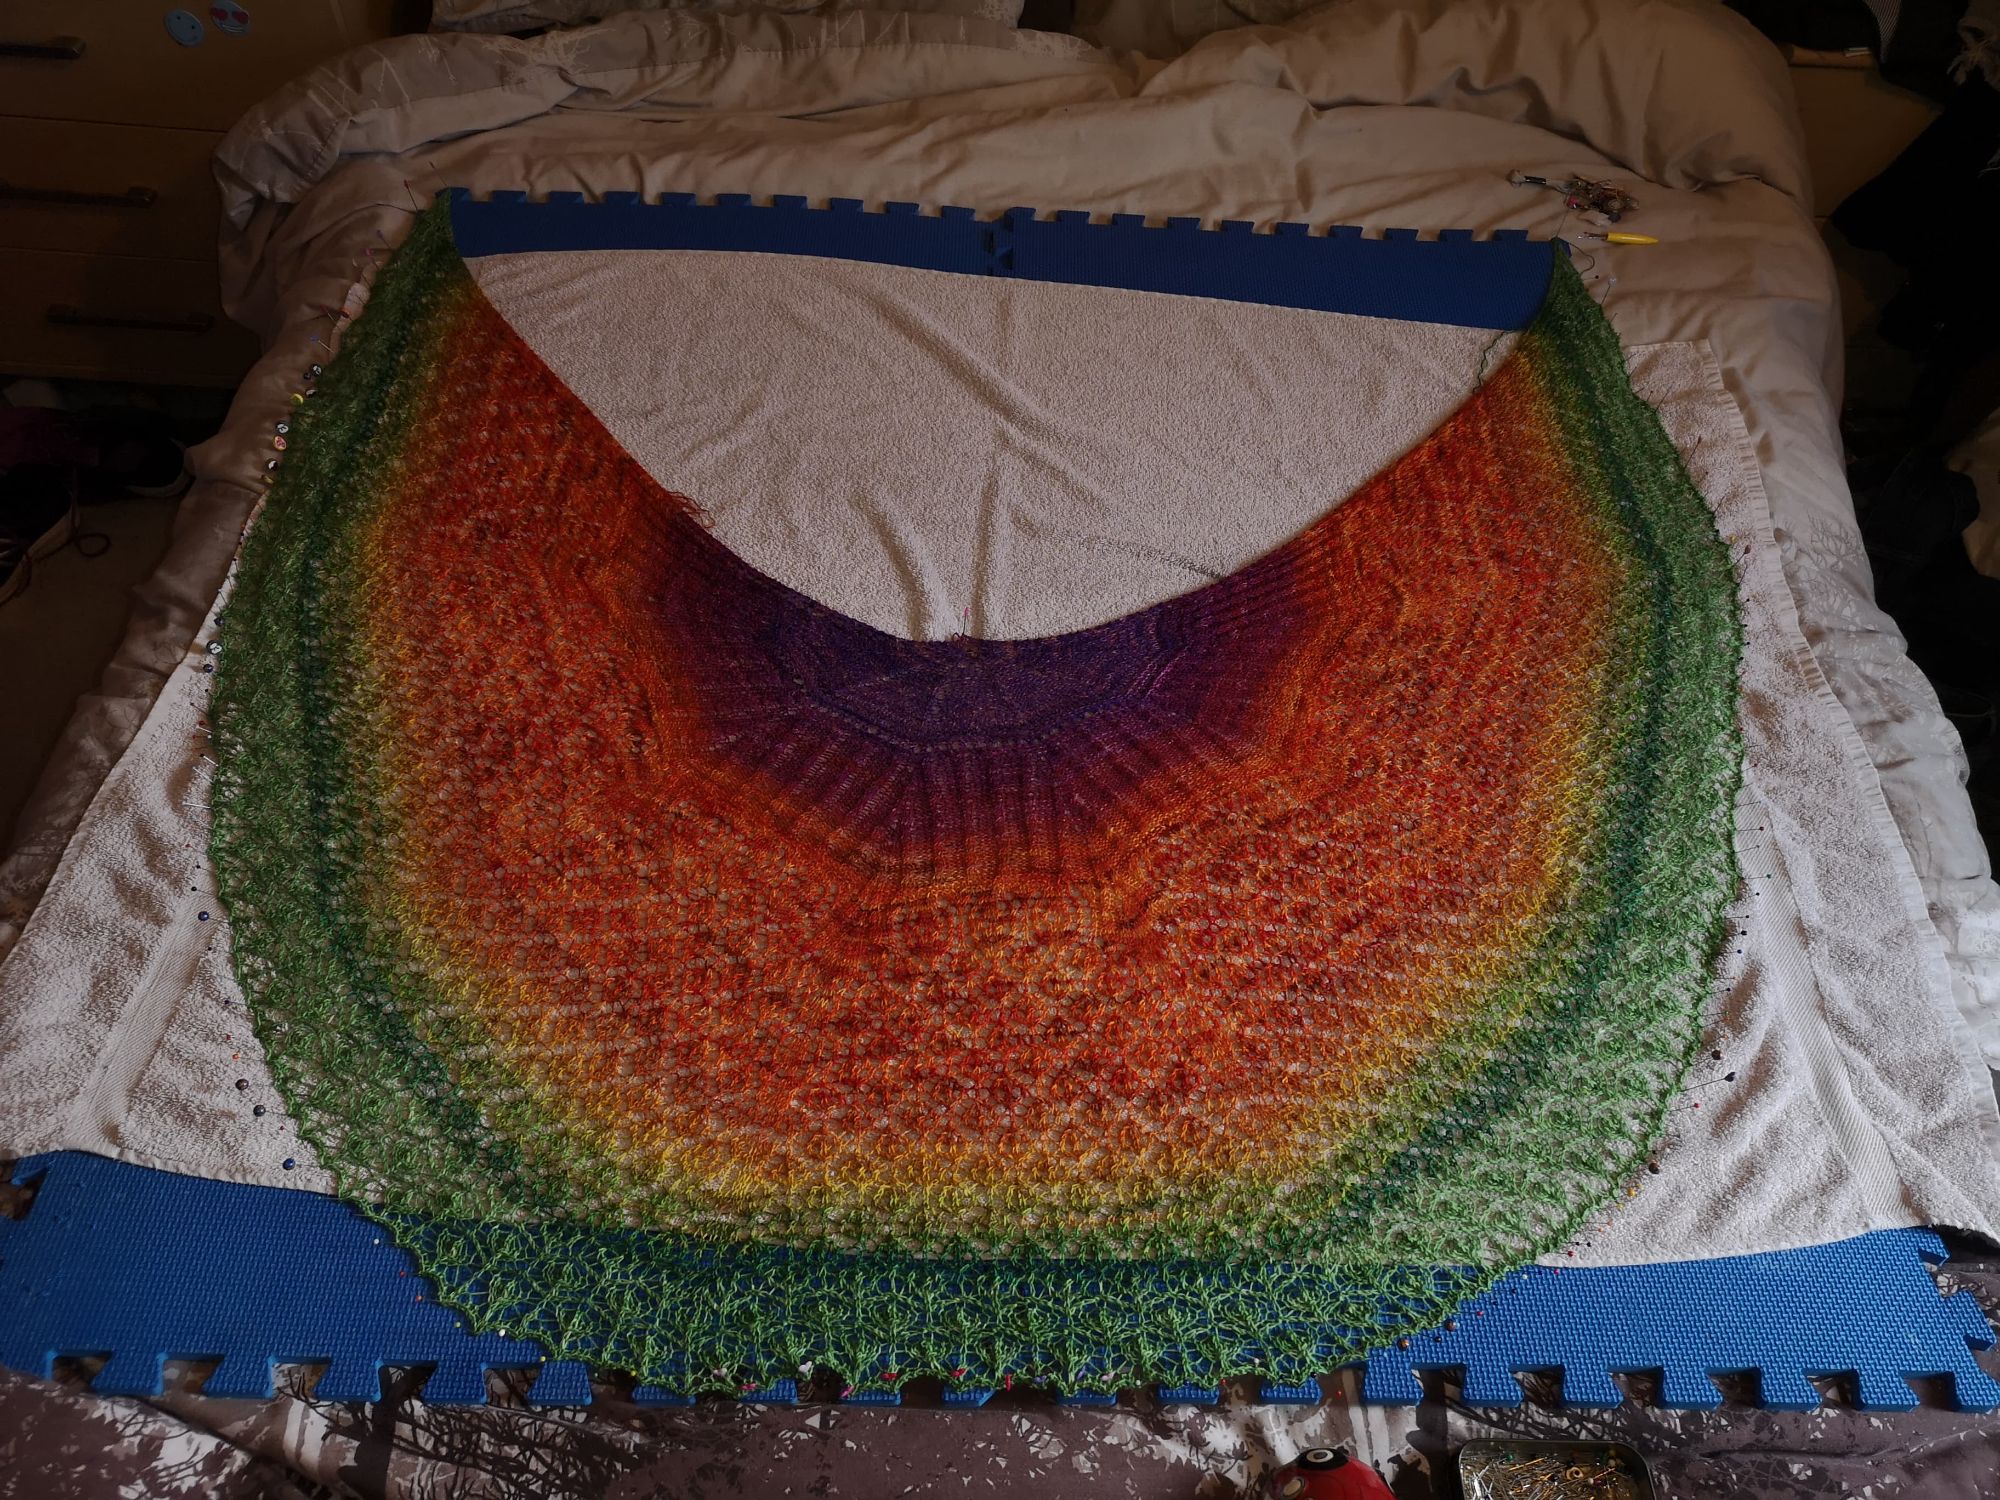 Age of Wonders shawl in a warm, orange to green gradient spread out blocking on a bed